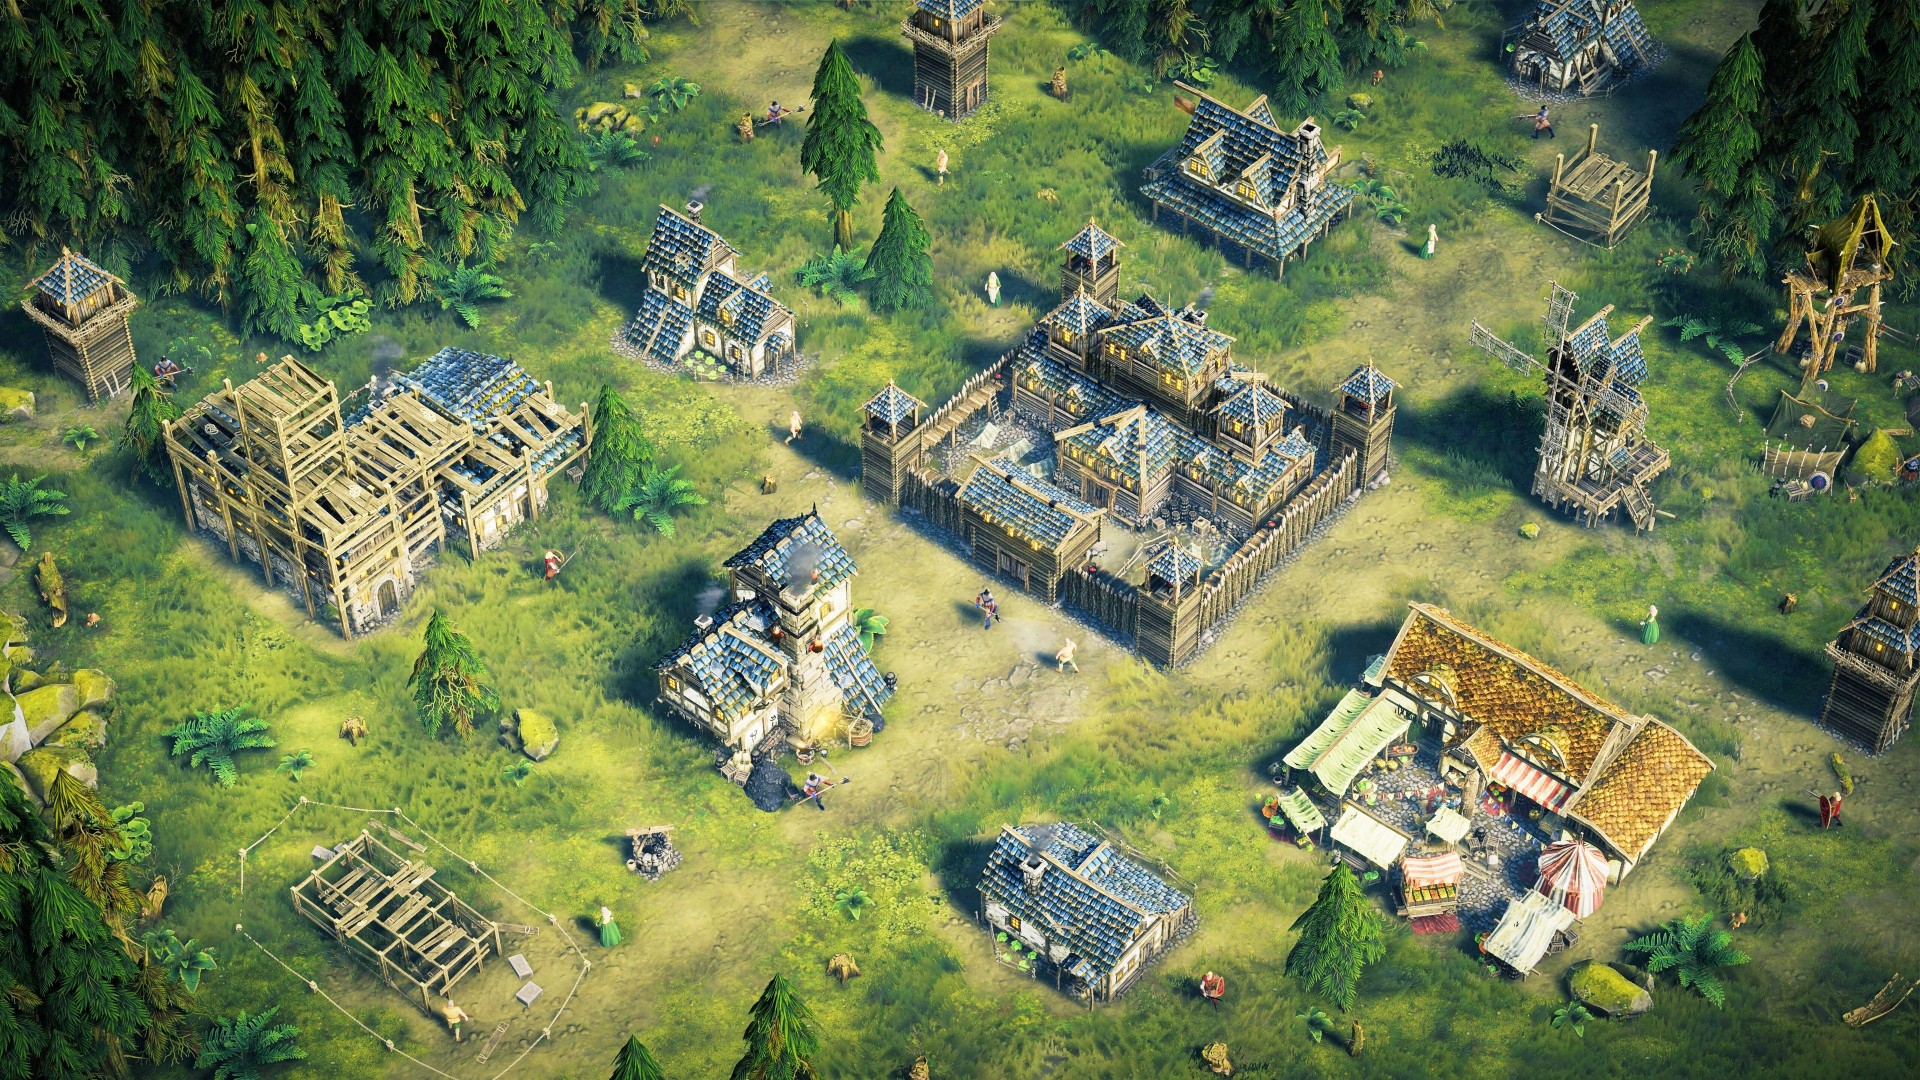 Legendary RTS game Majesty gets new spiritual sequel, coming to Steam